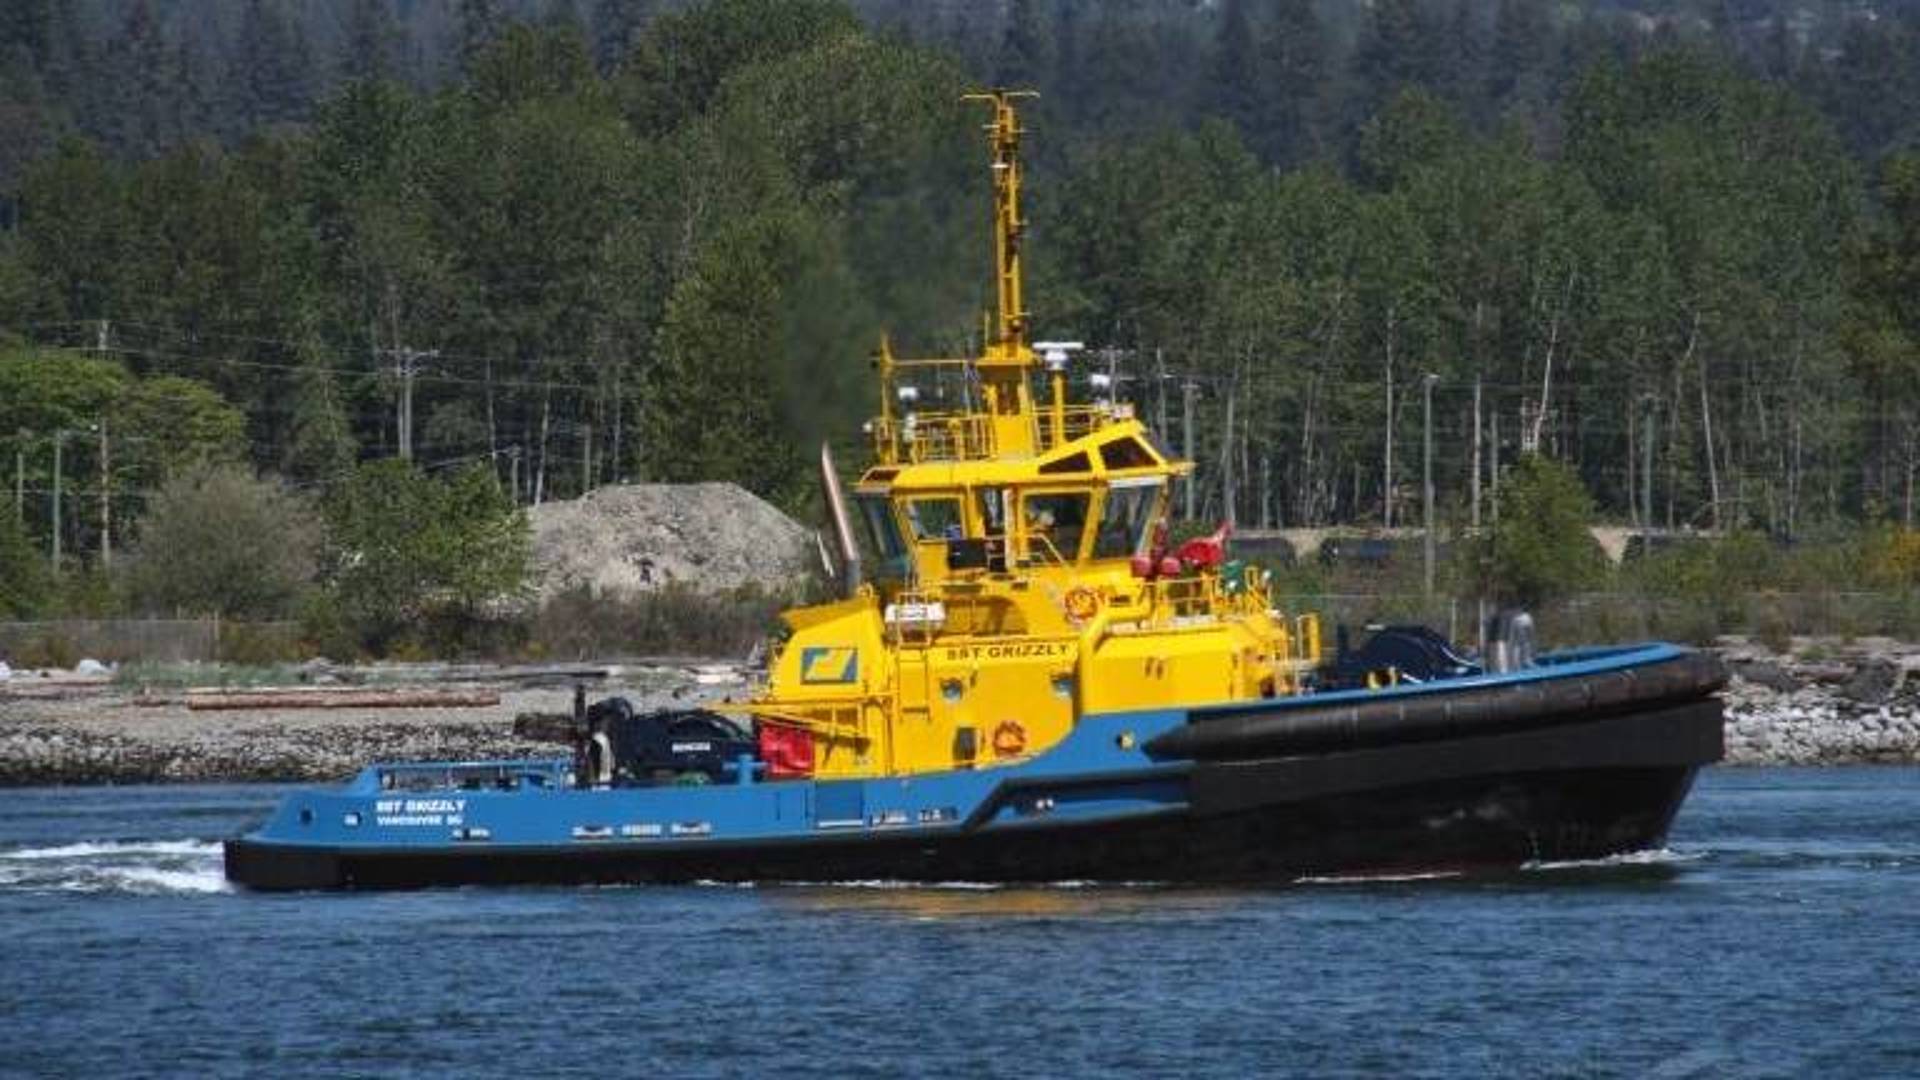 SST Grizzly Tug